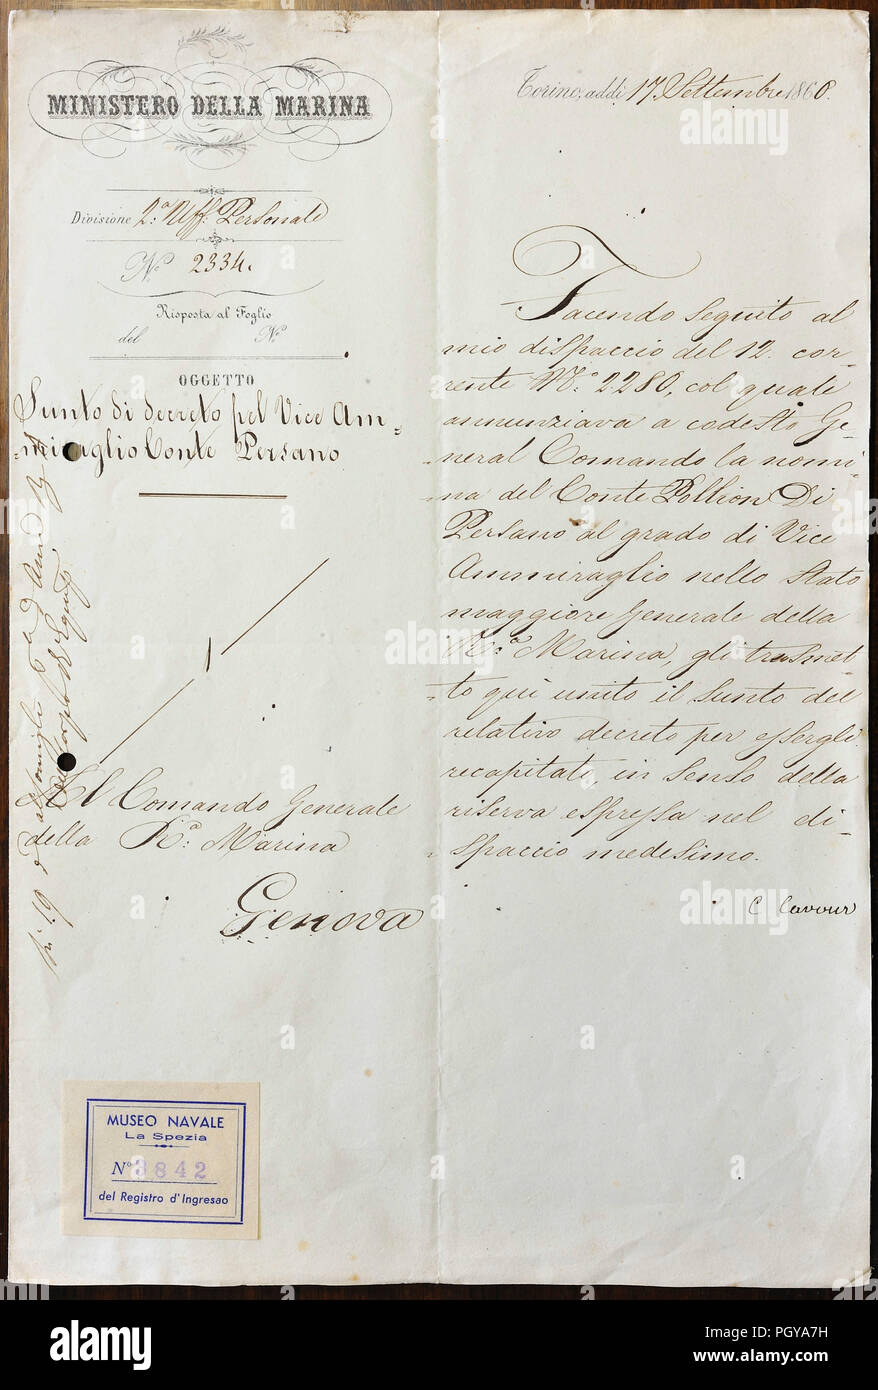 Original letter from the Ministry of the Navy No. 2334 of 17/9/1860. Promotion decree to Vice Admiral of the Carlo Pellion of Persano. He participated in Lissa | Stock Photo